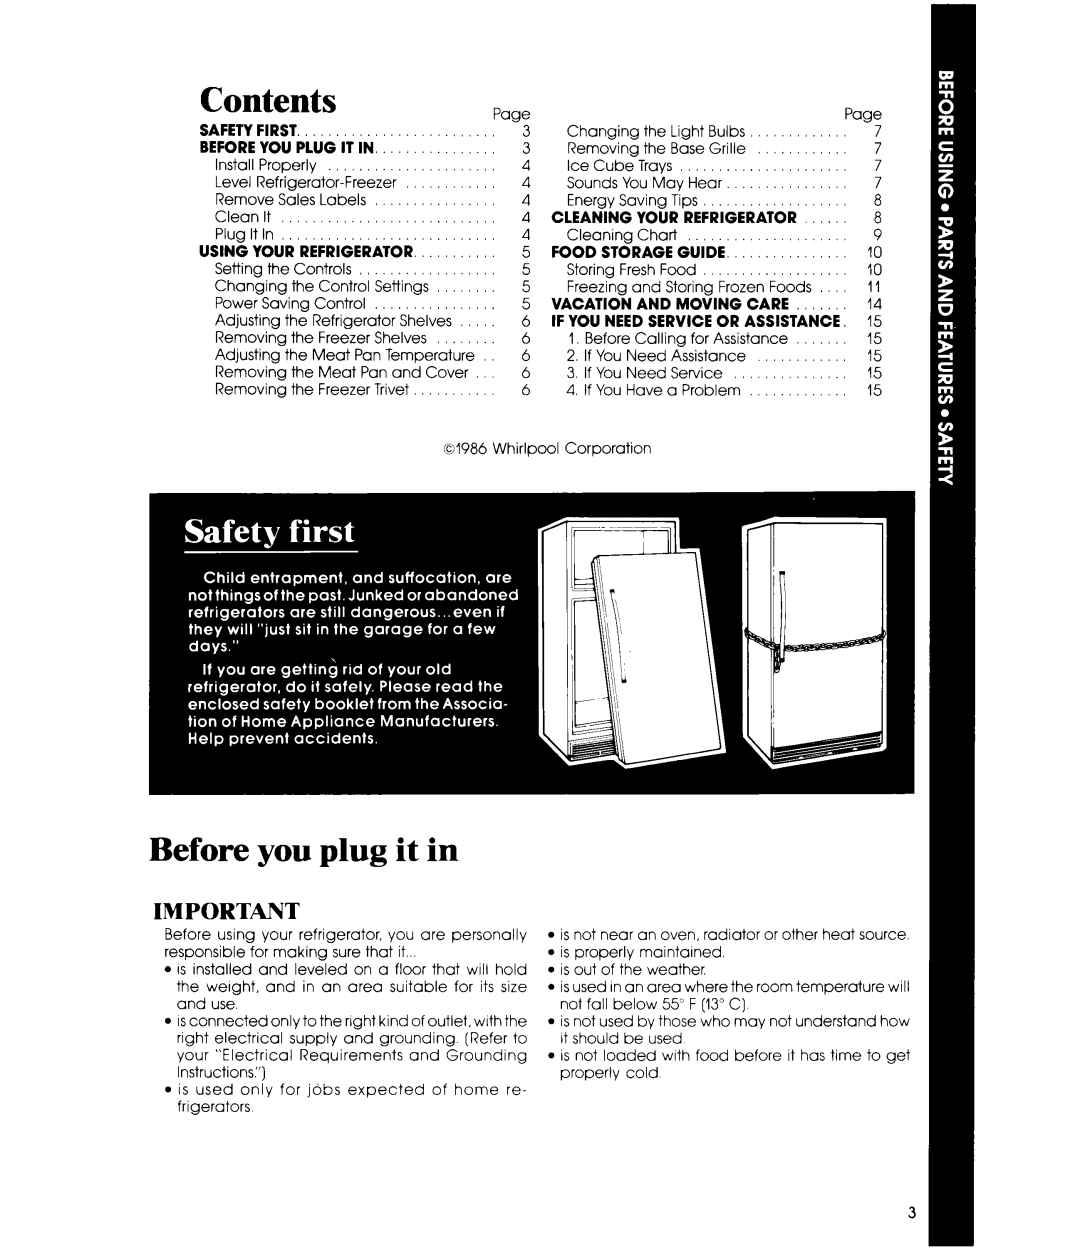 Whirlpool EDISSC manual Before you plug it in, Beforeyou Plug It In, Cleaning Your Refrigerator, Using Your Refrigerator 